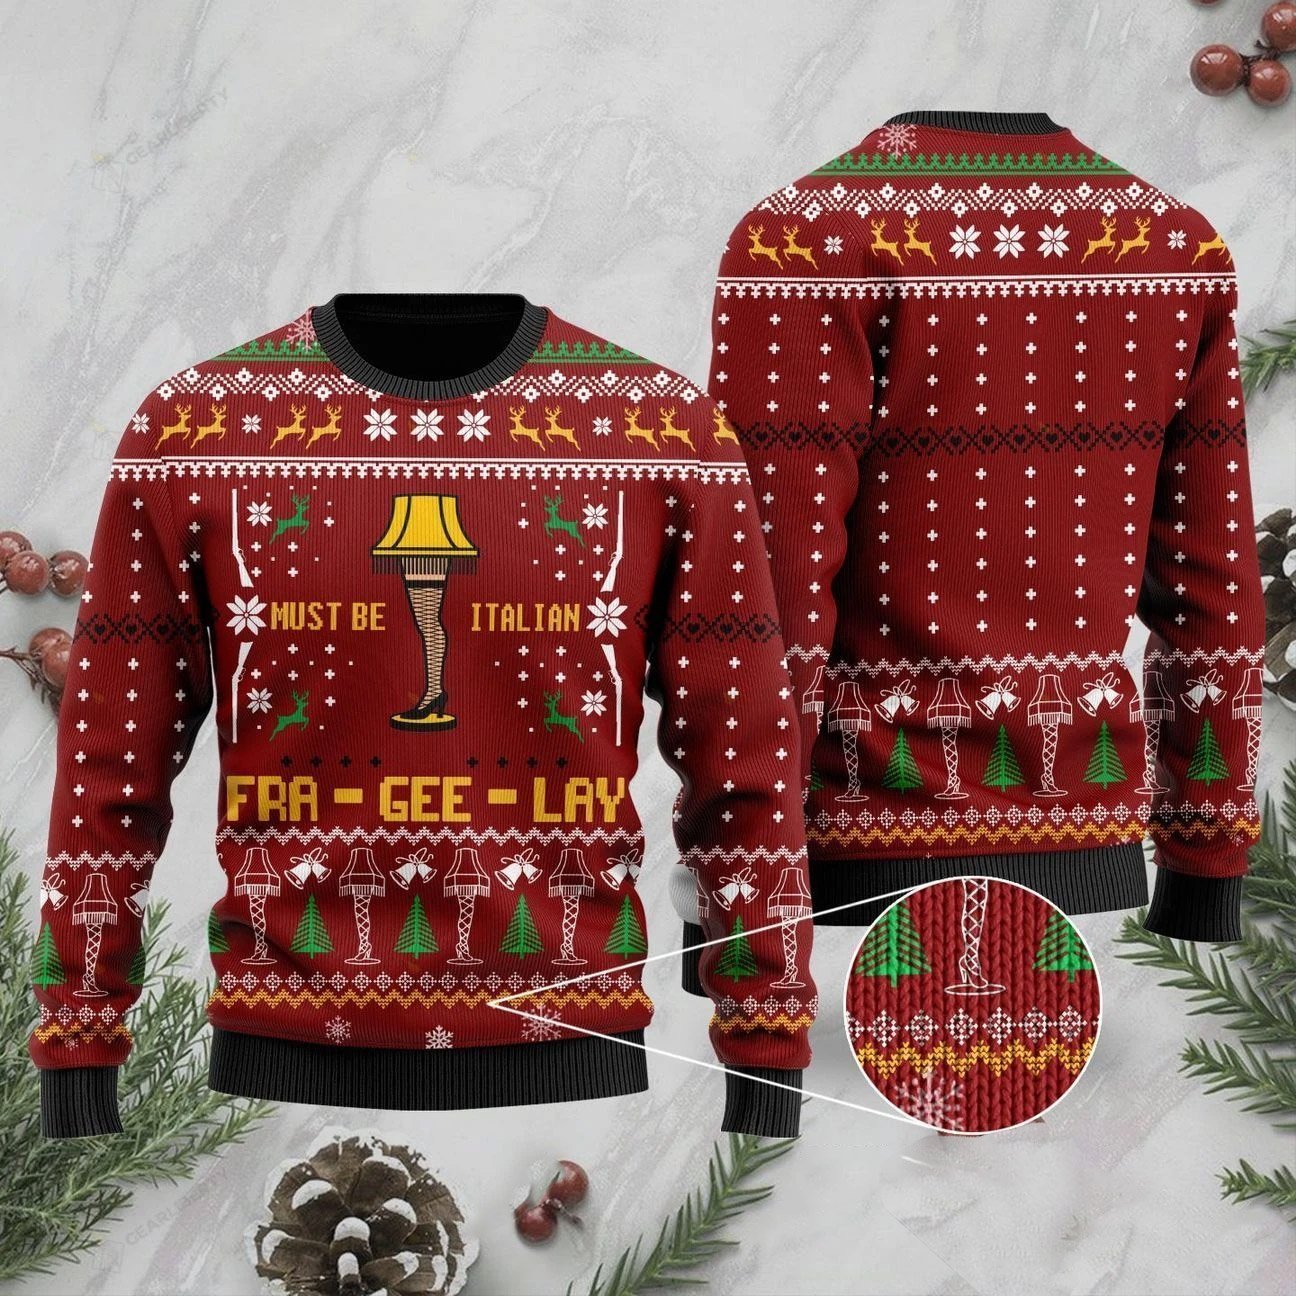 Fra-gee-lay Ugly Ugly Sweater